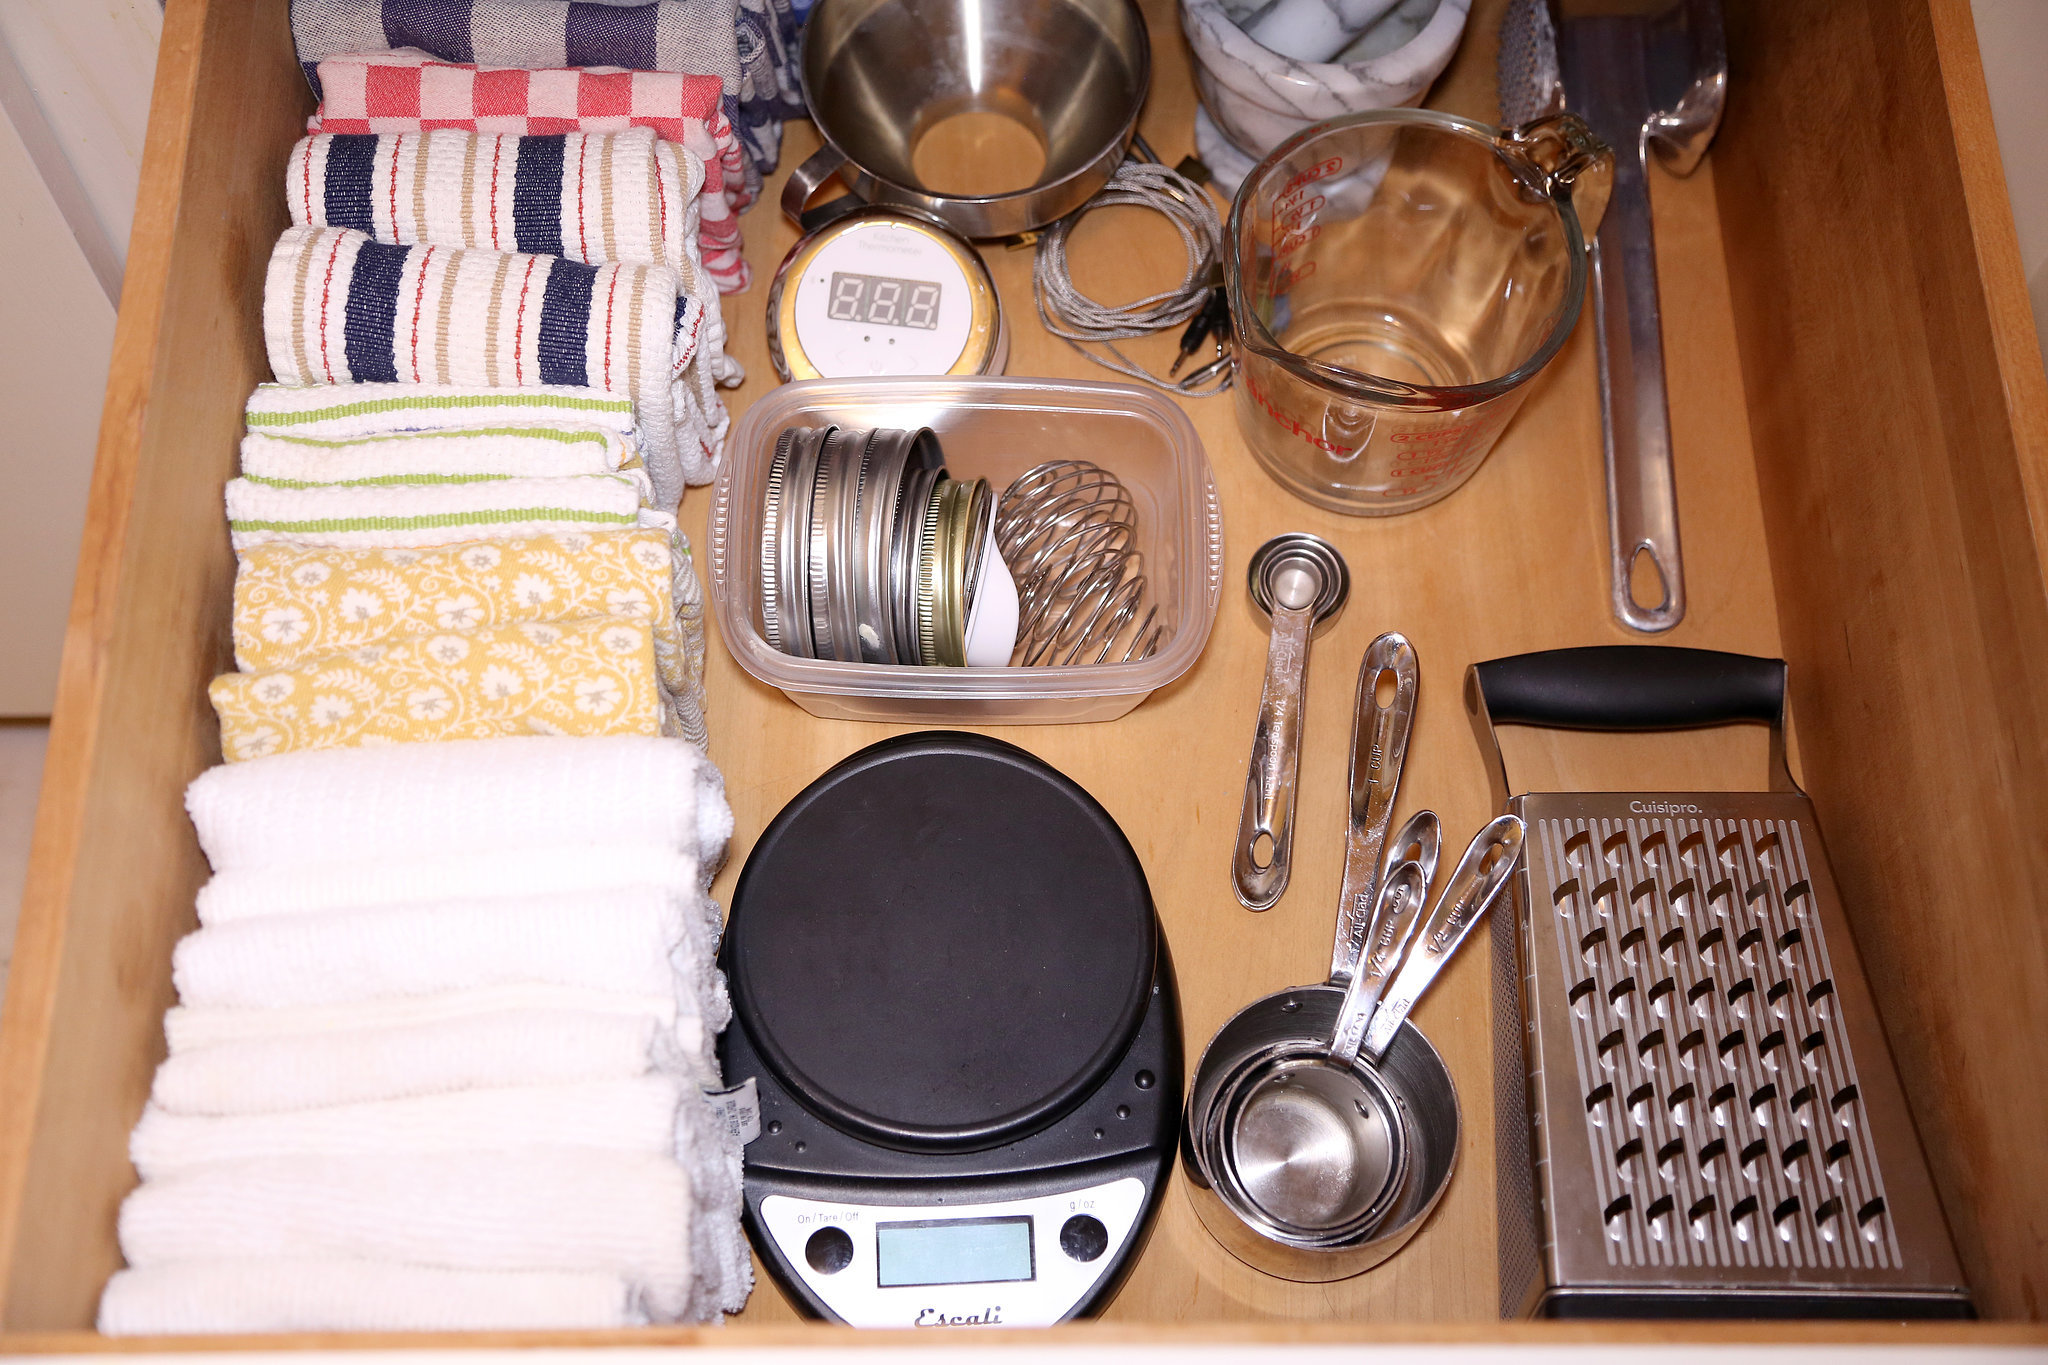 What It's Like to Use the KonMari Method on a Kitchen | POPSUGAR Food